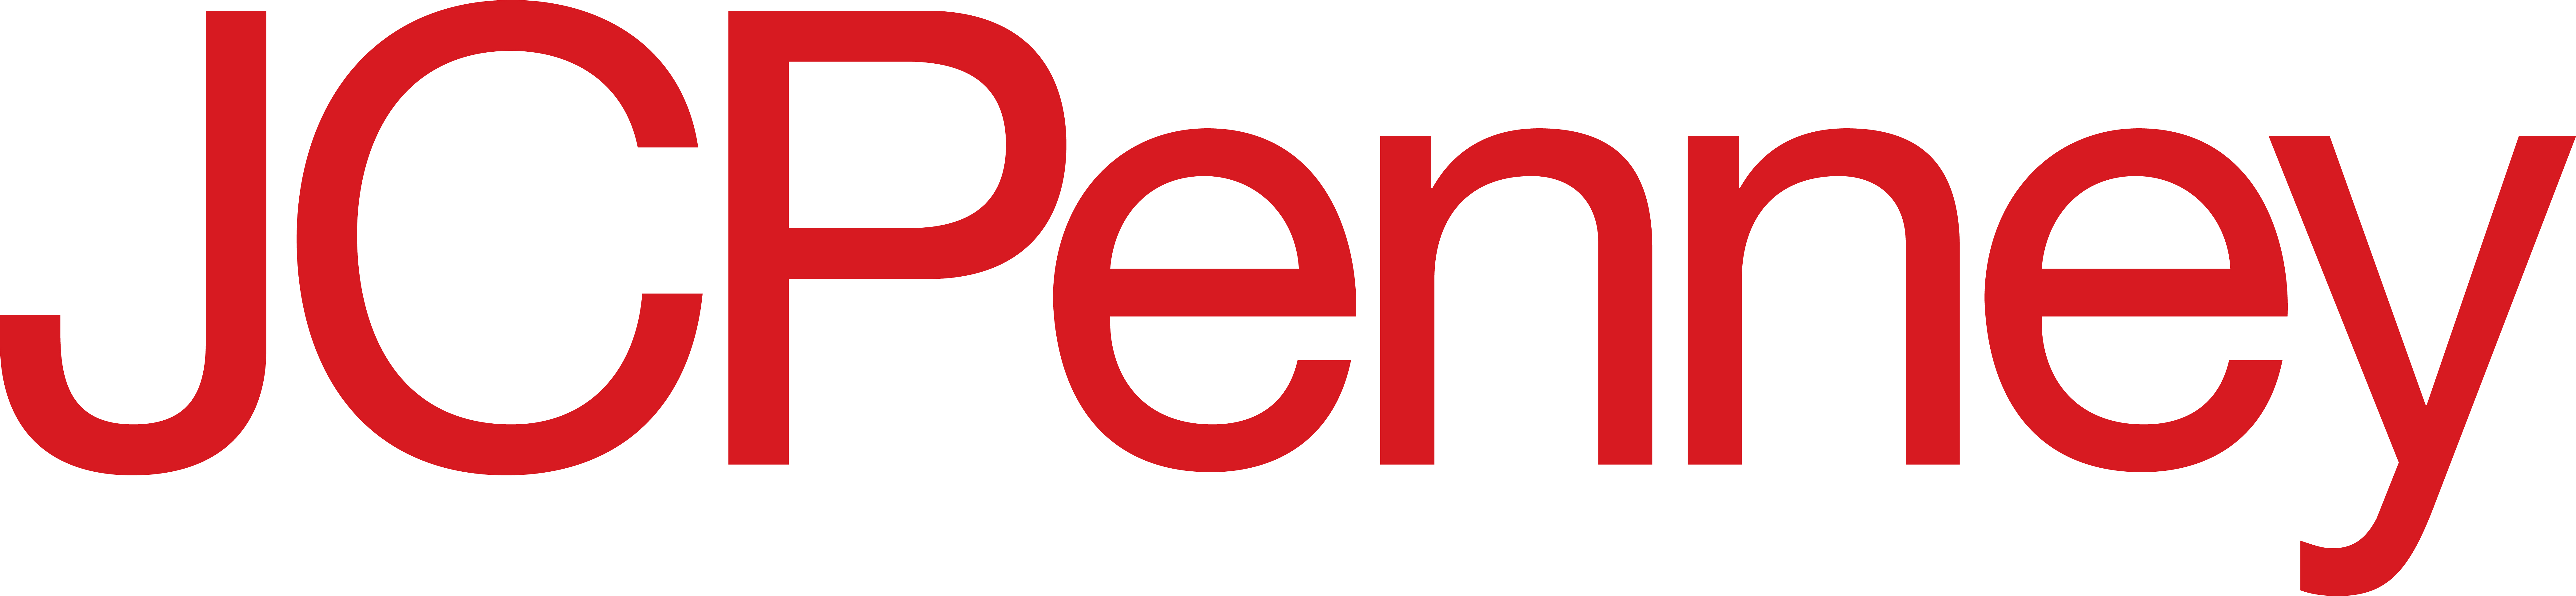 Application deadline for JCPenney: Friday, May 22,2015. Supporting ...